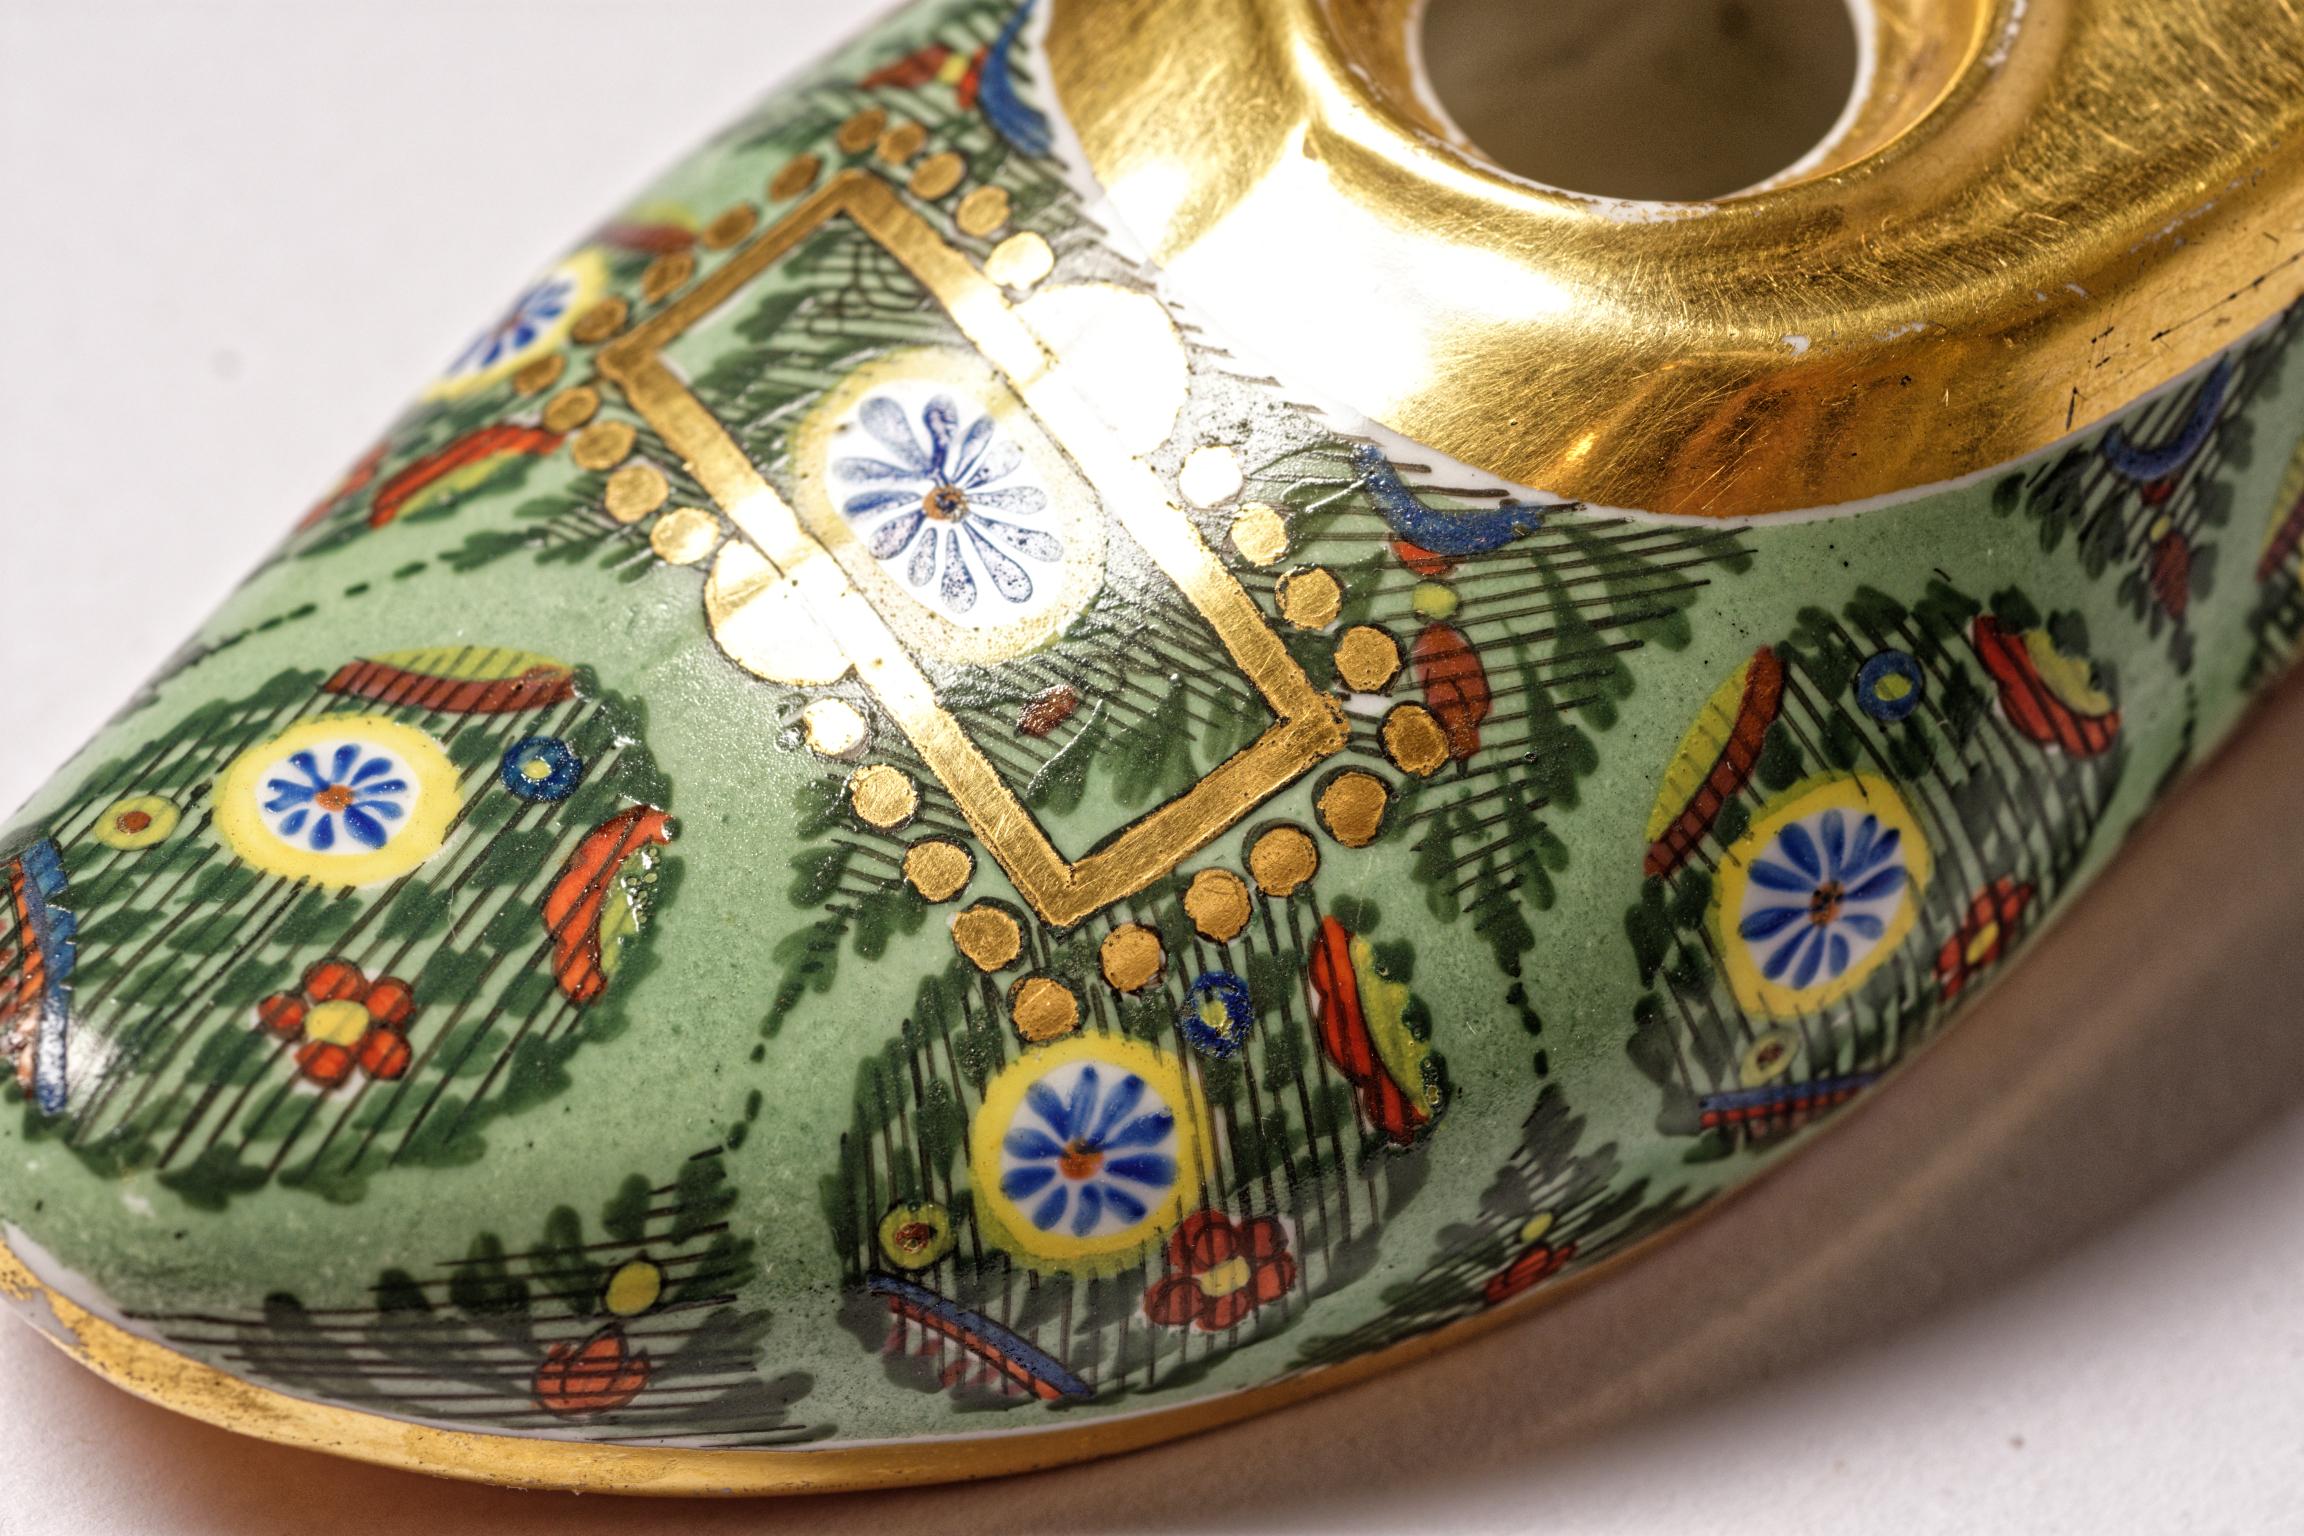 Early 19th Century Spode circa 1820 Vibrant Shoe or Slipper Inkwell Base, Hand Painted Rare Object